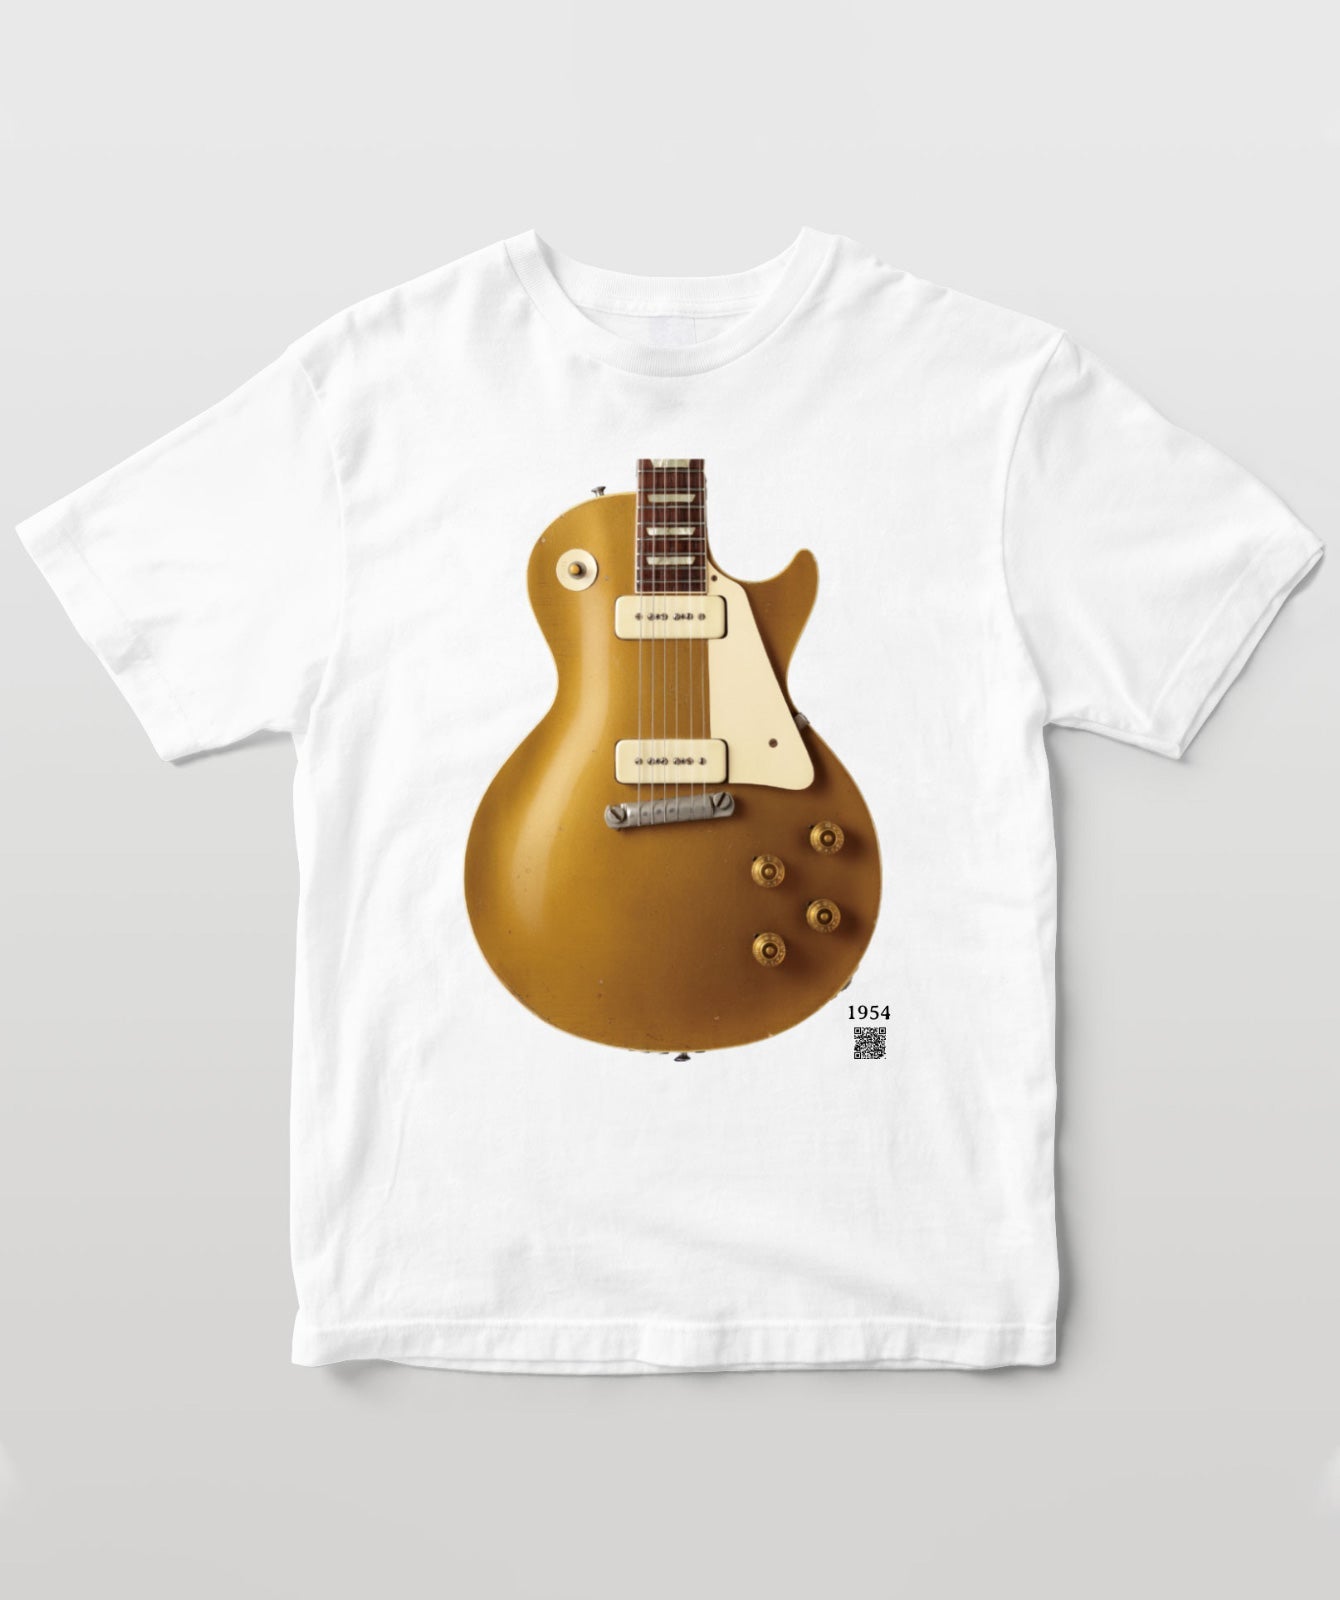 Gibson Goldtop Player's Book Tシャツ 1954 Les Paul Model